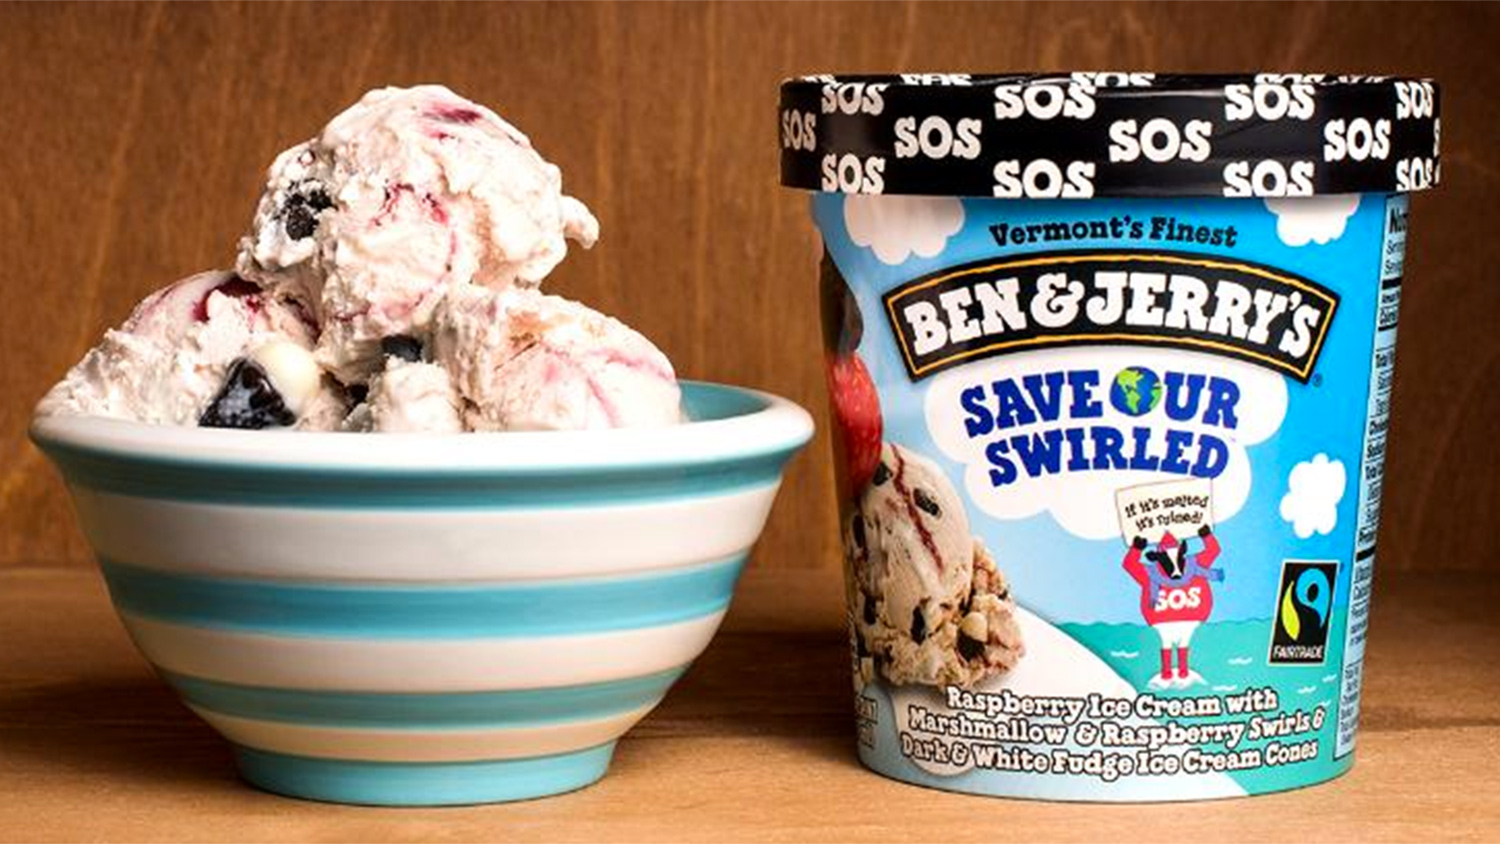 Save Our Swirled ice cream container